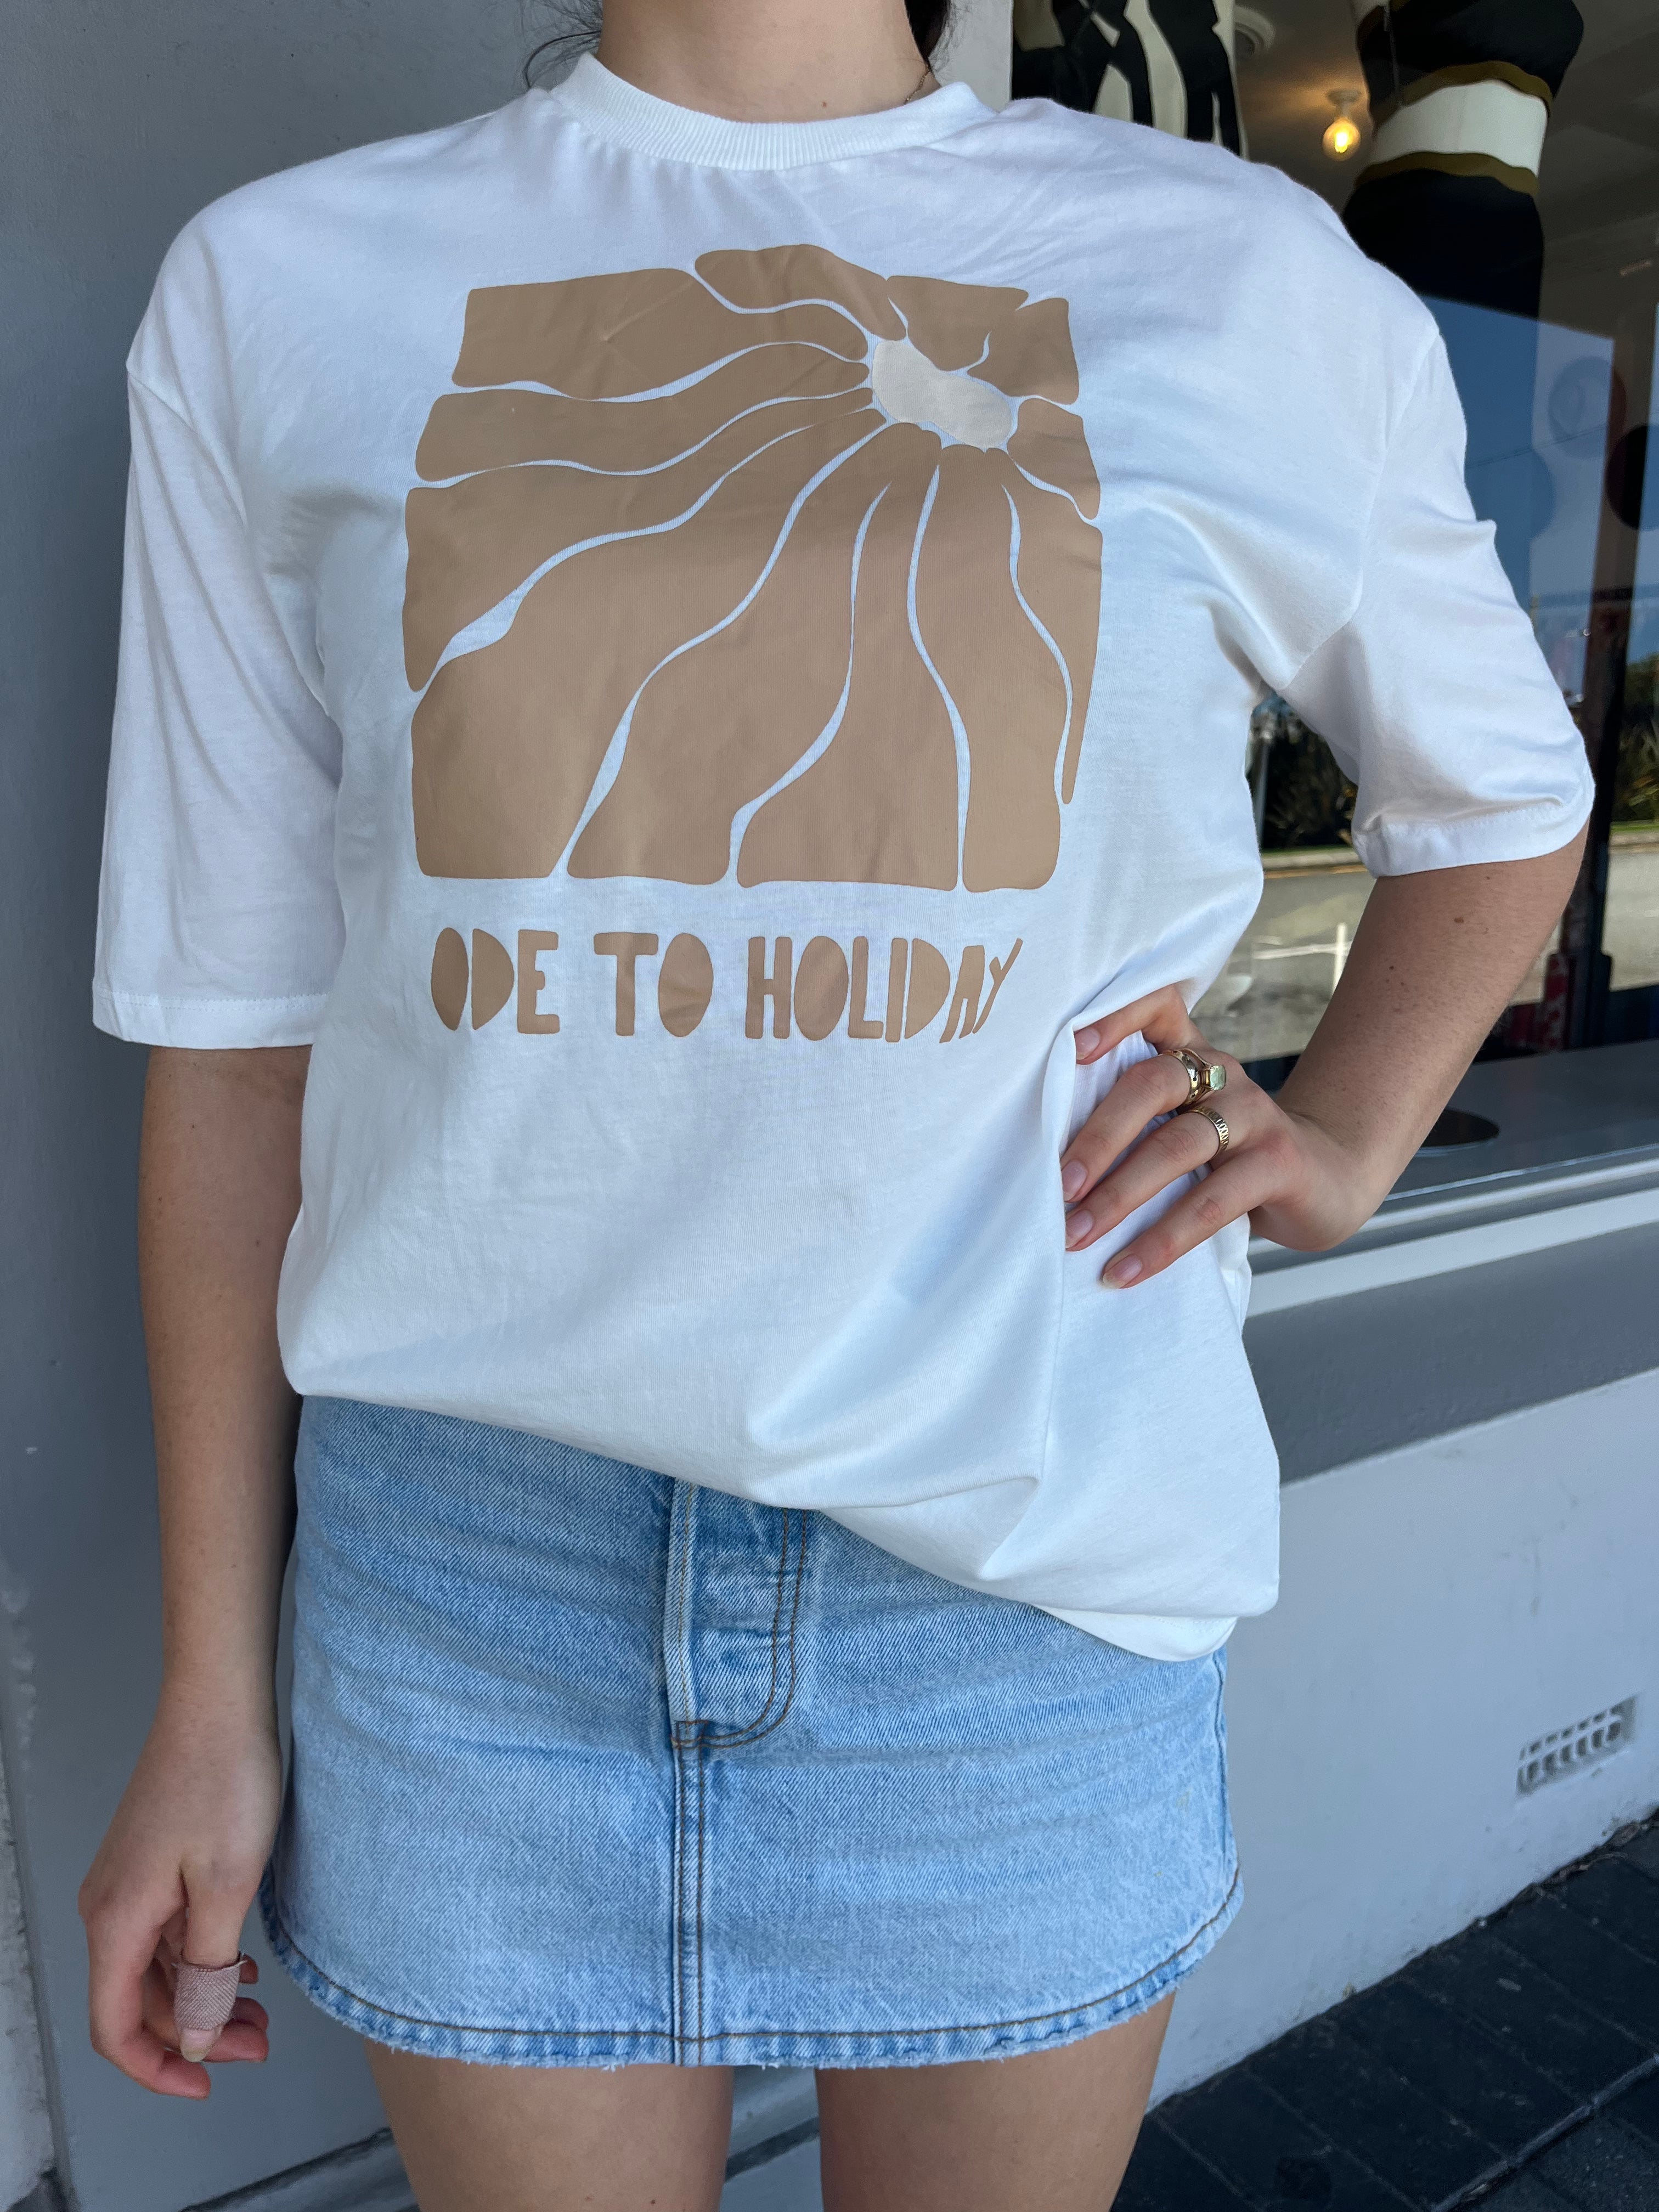 Ode To Holiday Tee